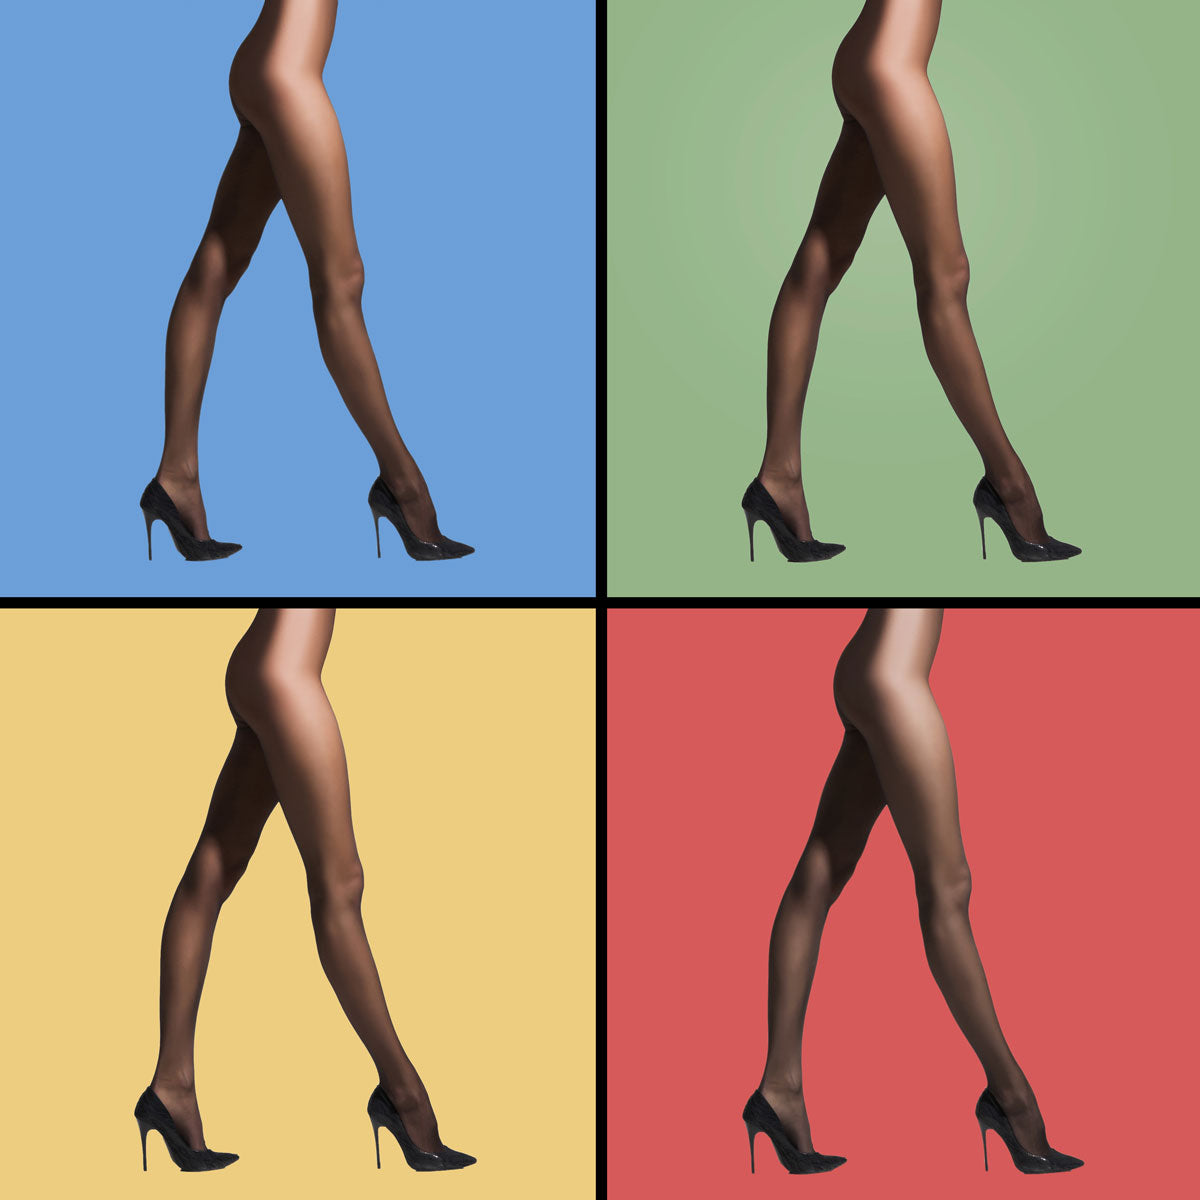 Pantyhose Throughout History